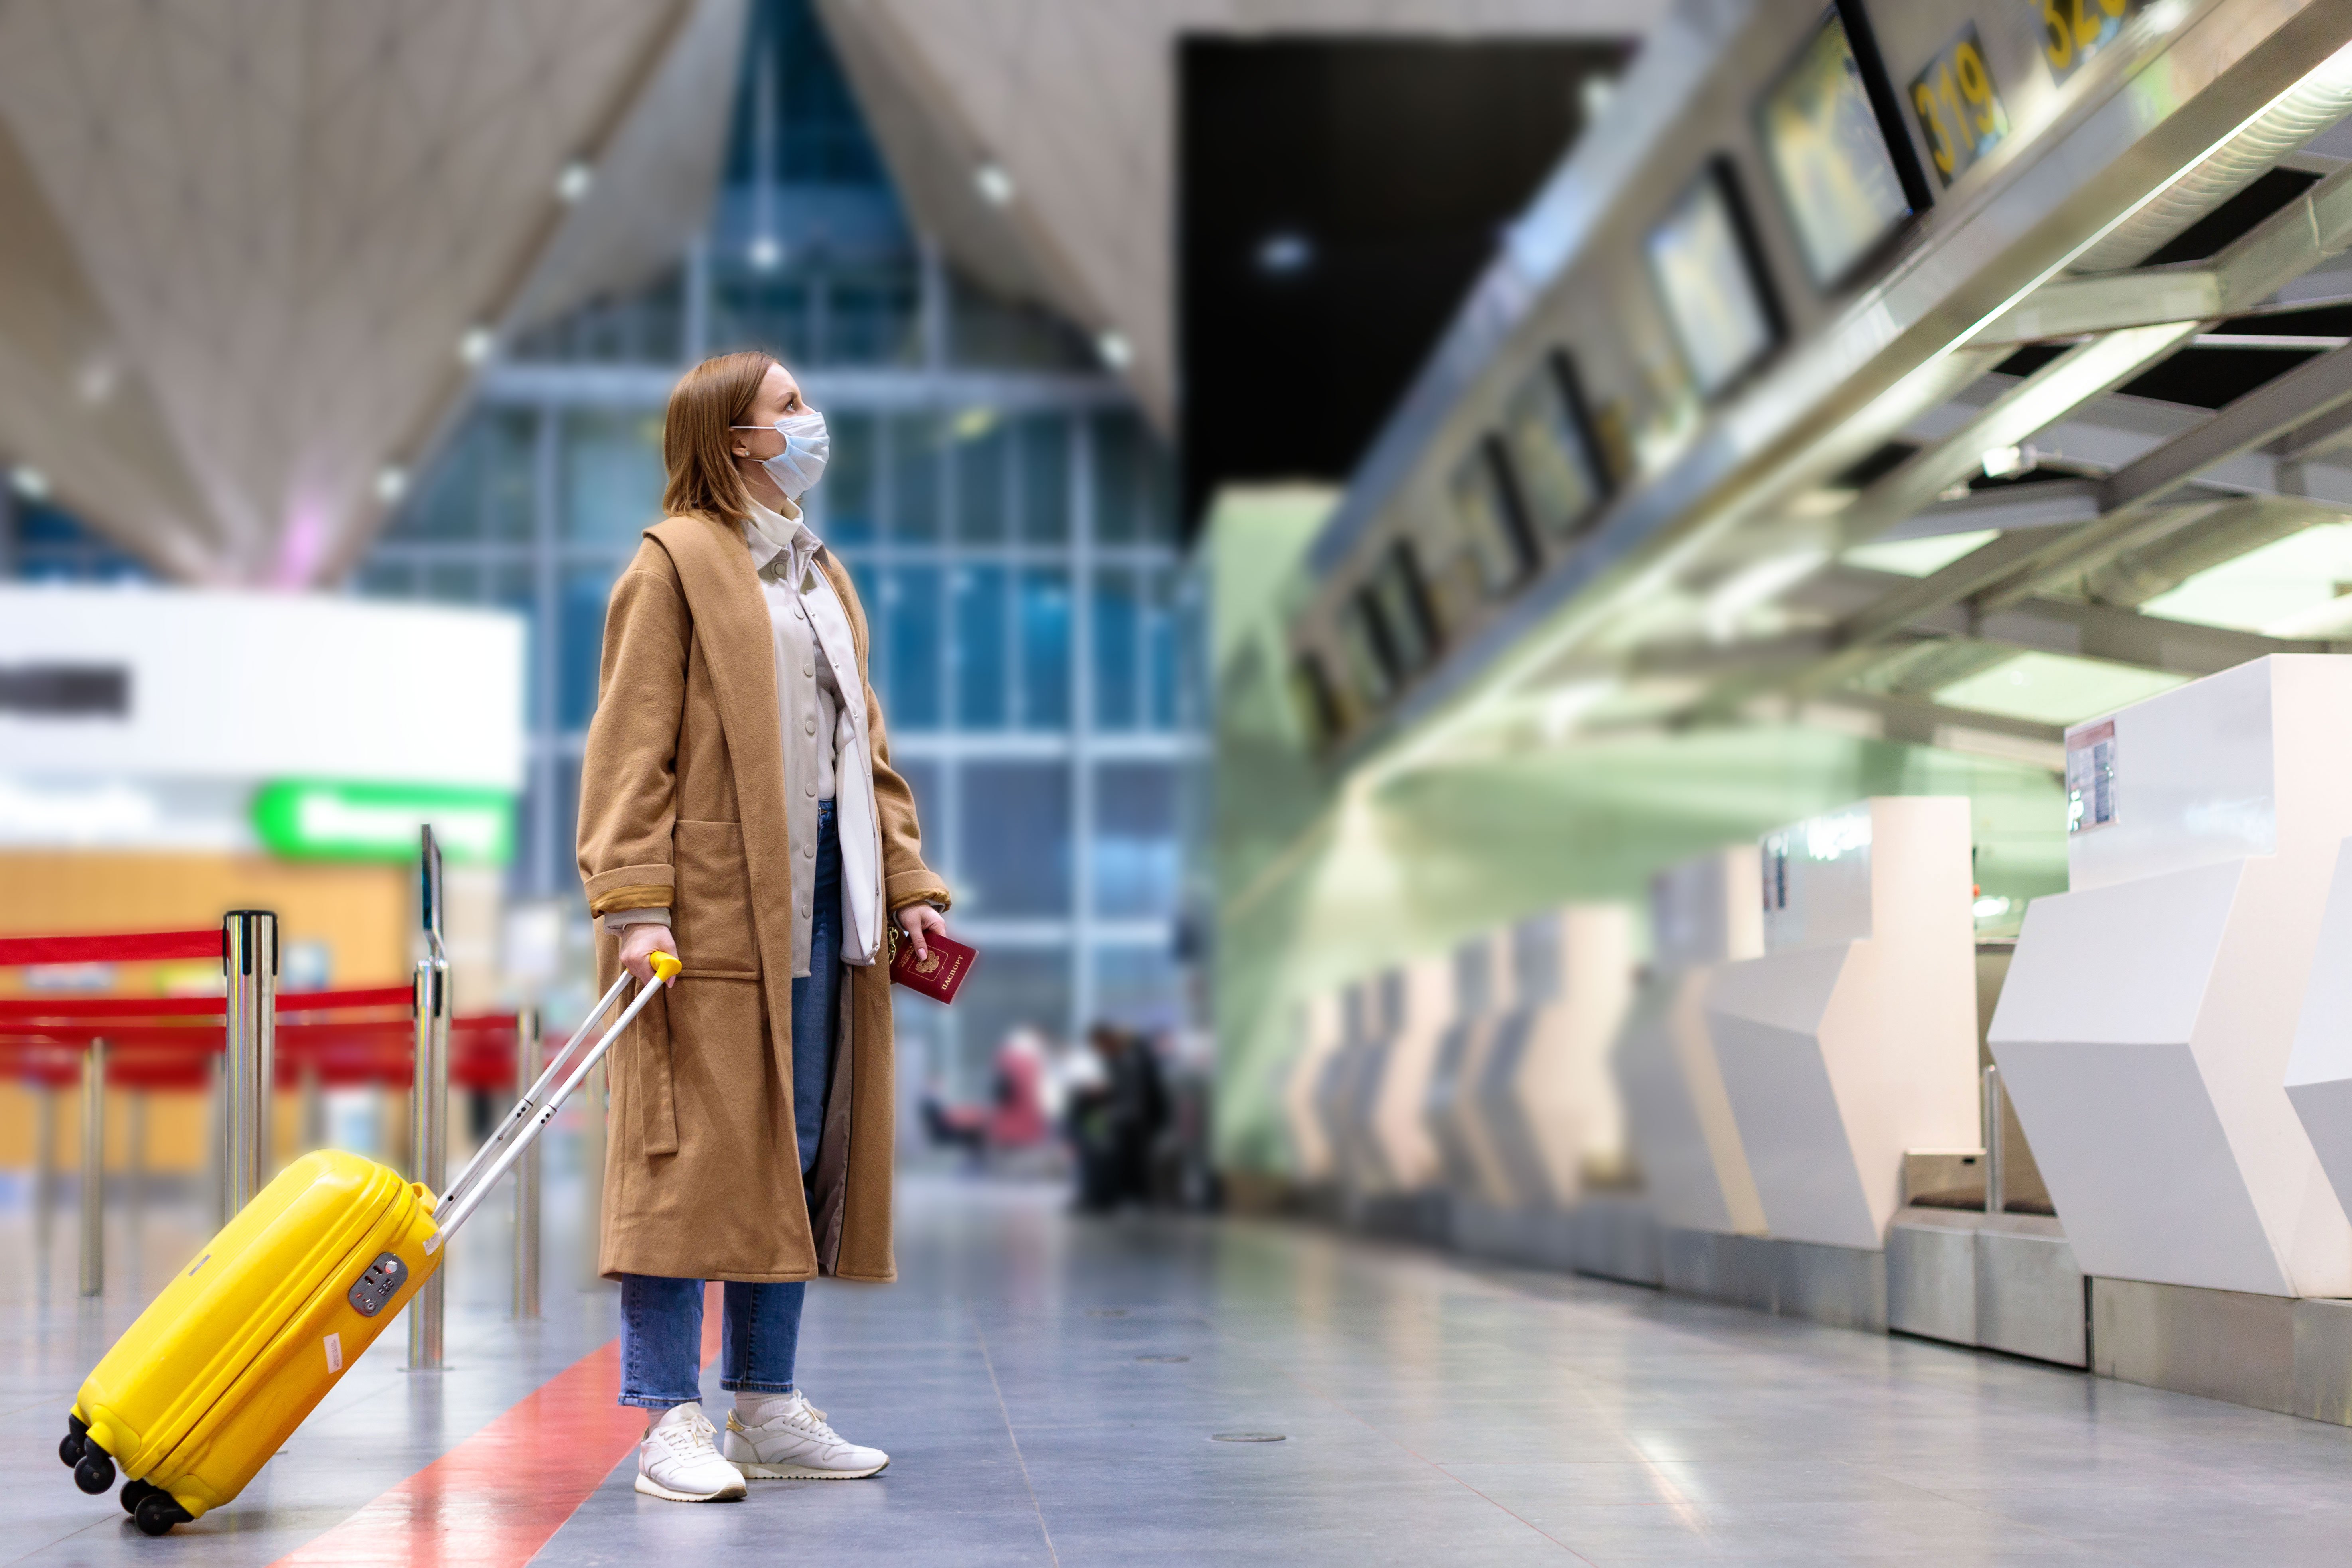 Woman with luggage standing at in front of a check-in counter at the airport terminal during the Covid-19 pandemic | Photo: Shutterstock